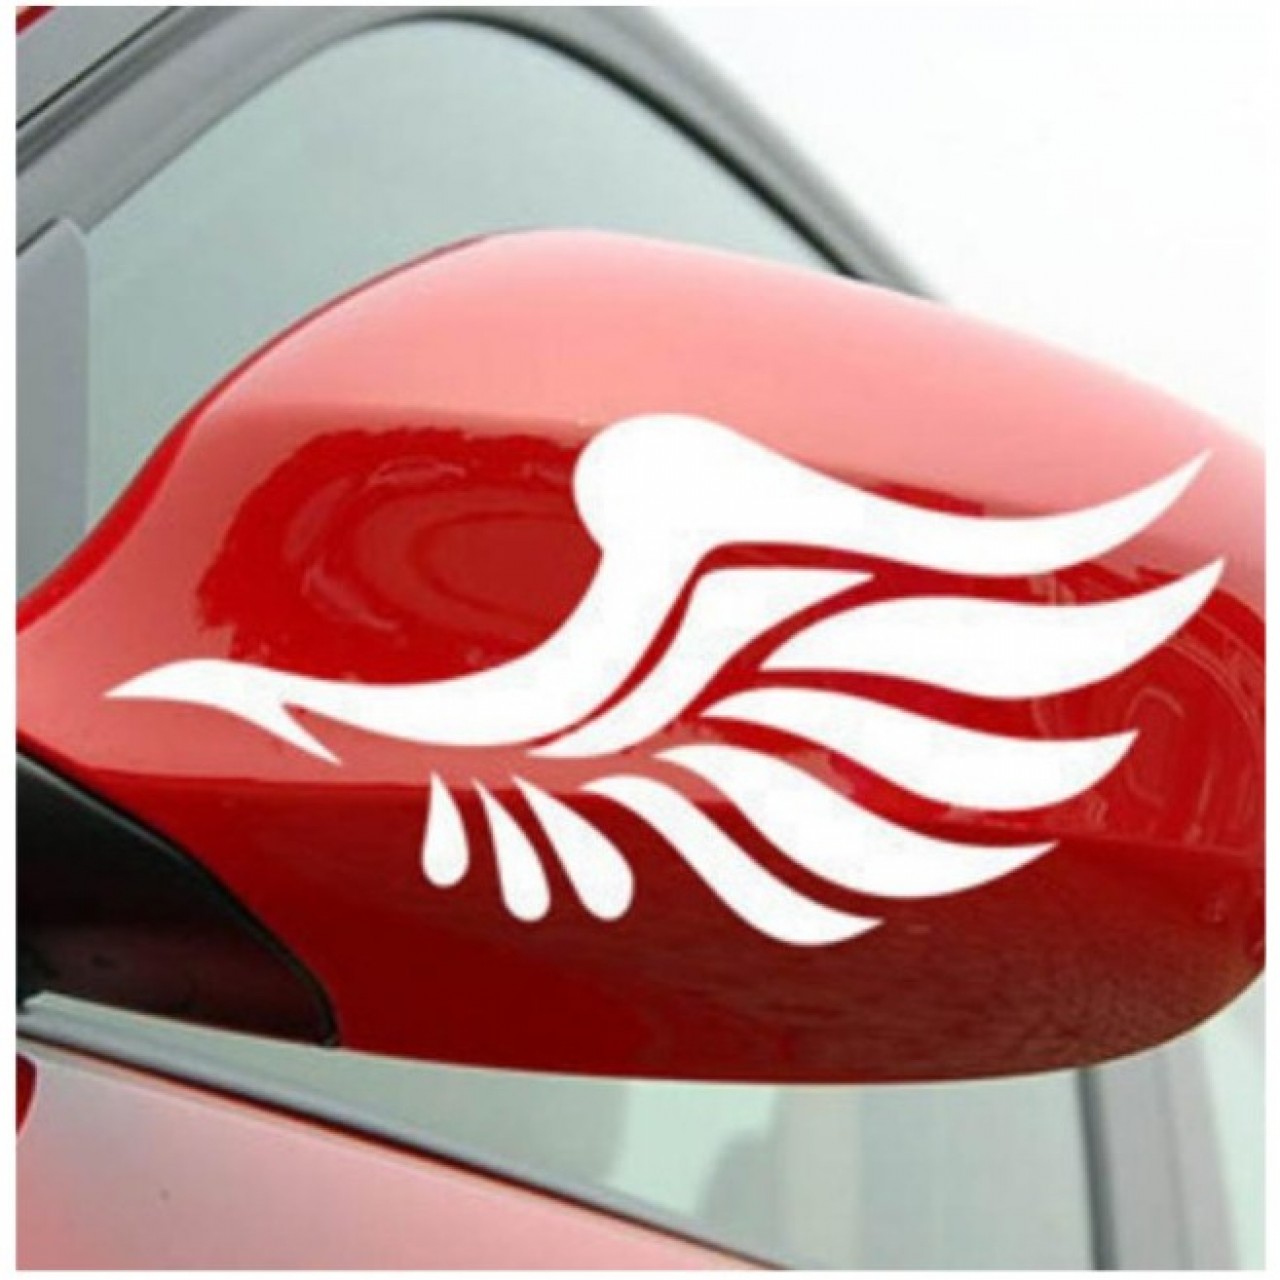 Mirror Pair of Wings Car Styling Stickers - White